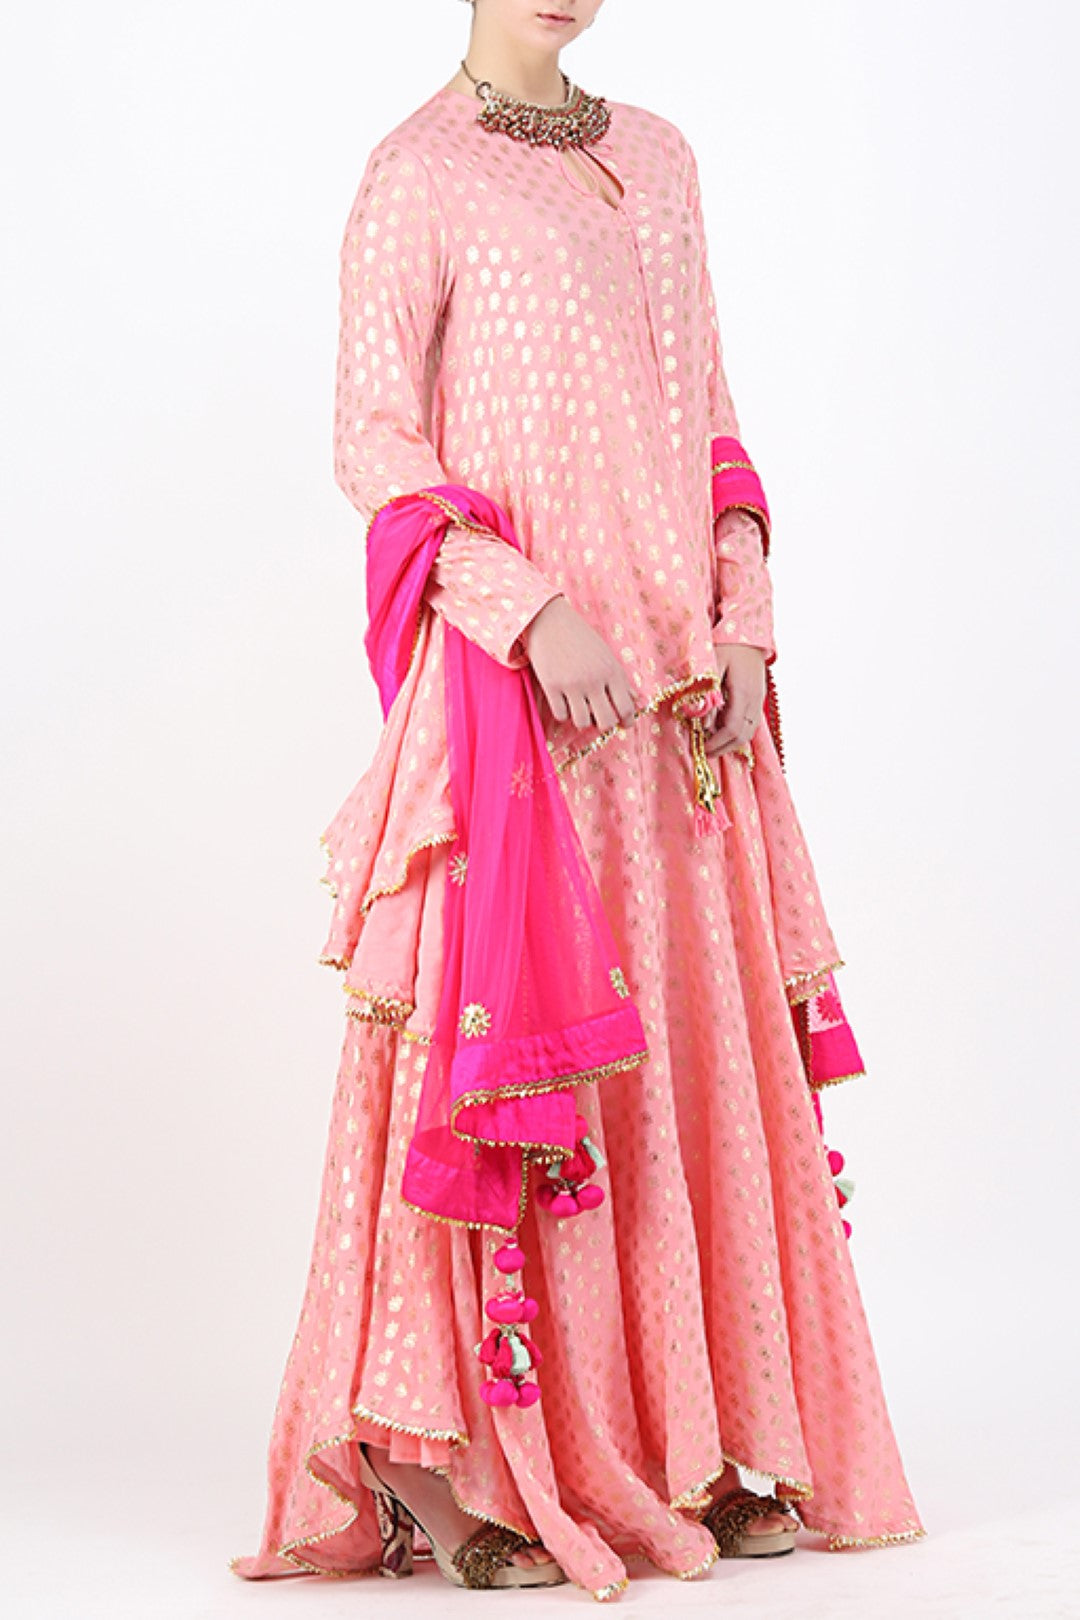 ROSE PINK GOLD PRINTED ASYMMETRICAL TUNIC WITH FOIL PRINTED ASYMMETRICAL SKIRT WITH DUPATTA.